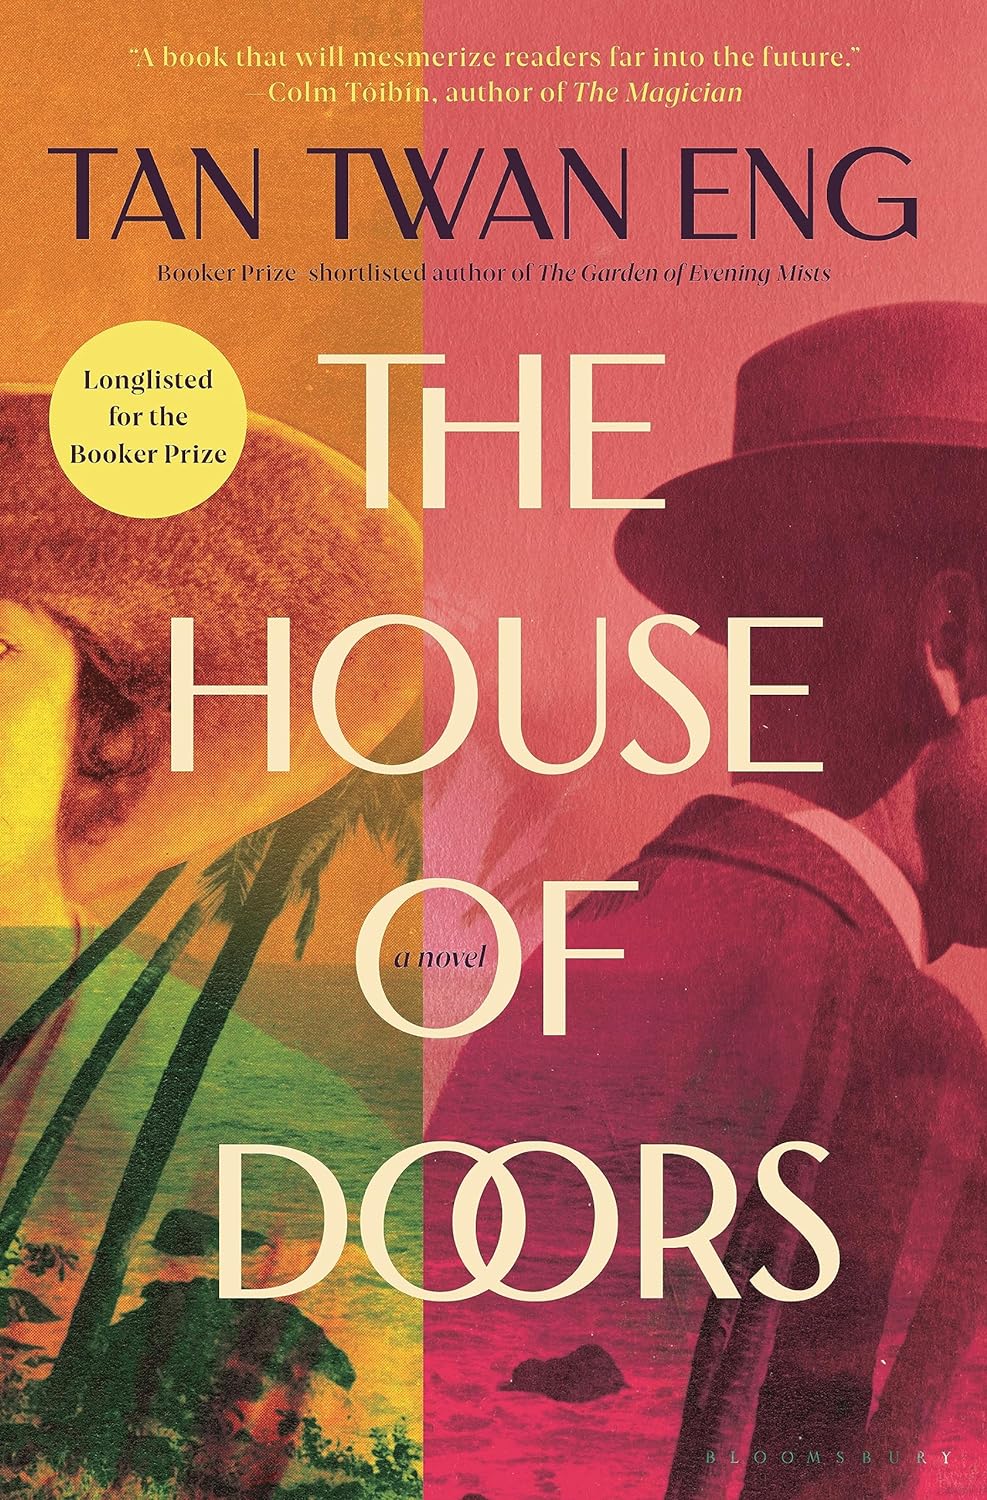 Image for "The House of Doors"